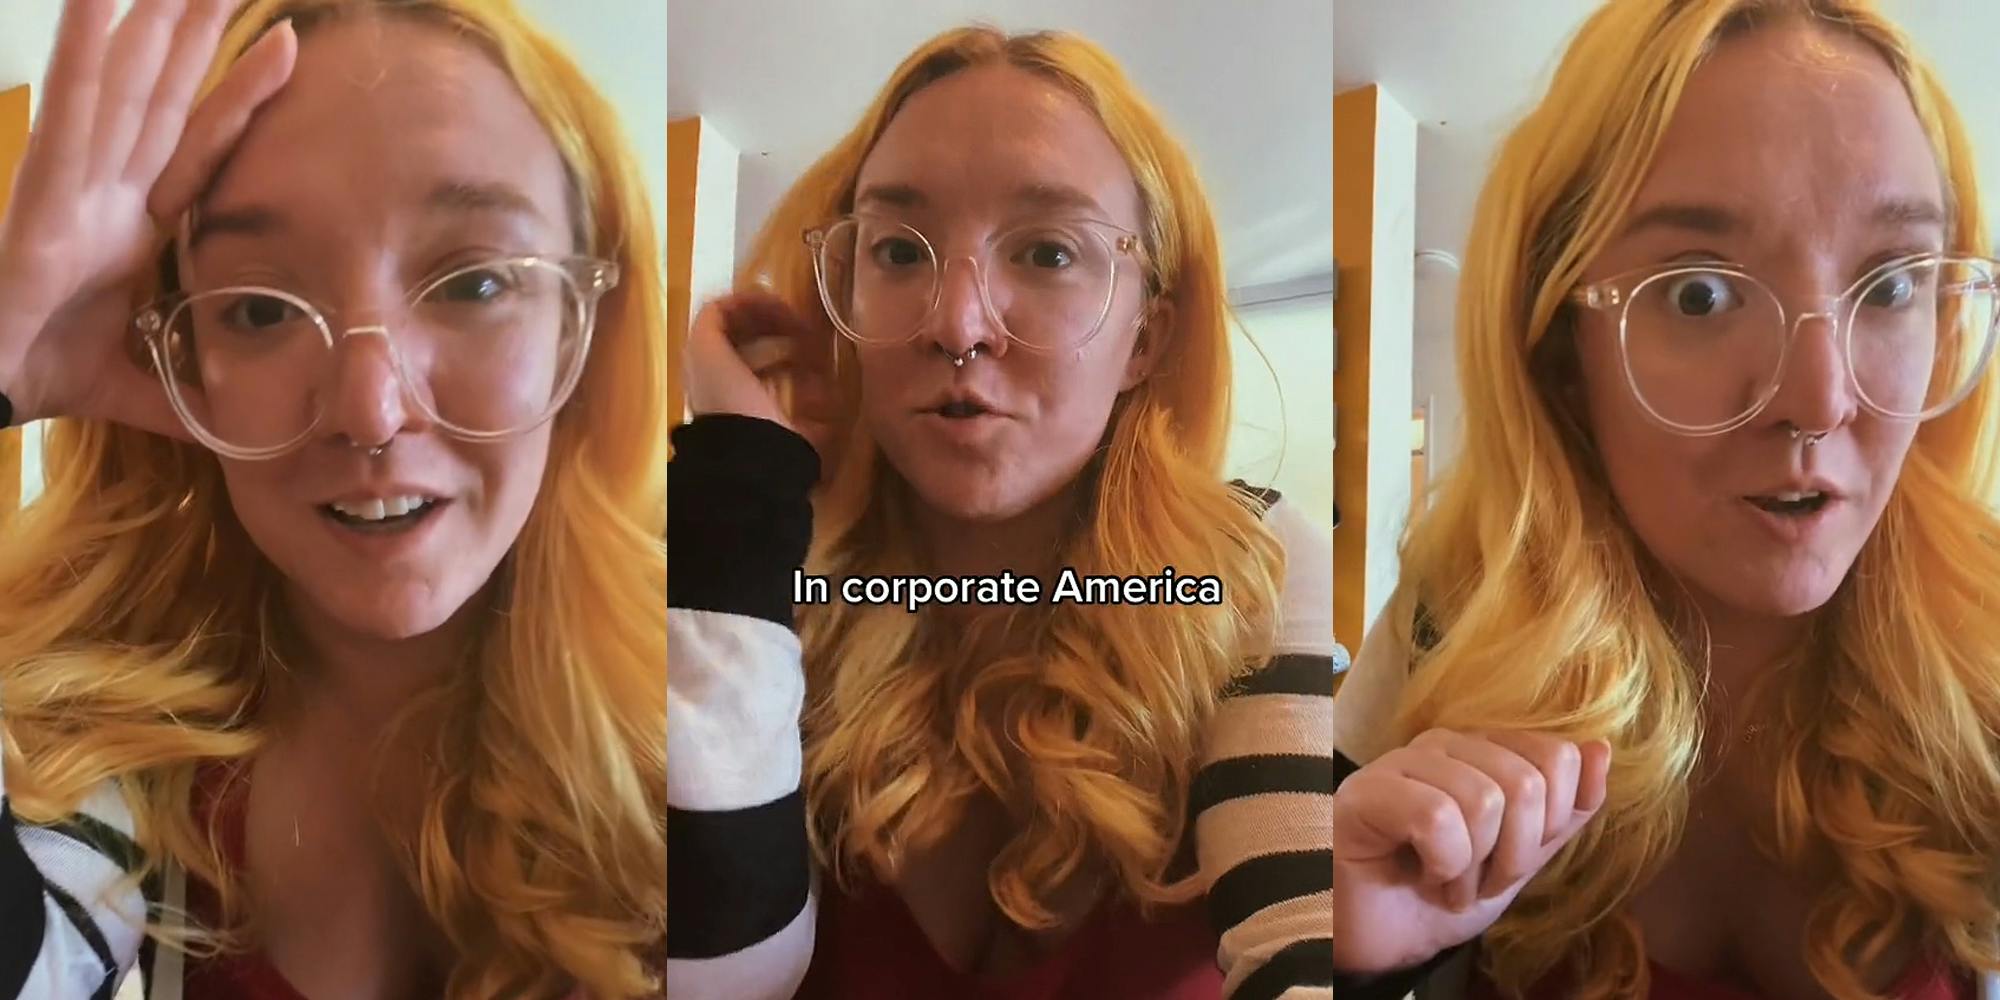 woman speaking hand on her forehead (l) woman speaking hand in hair caption "In corporate America" (c) woman speaking hand out (r)